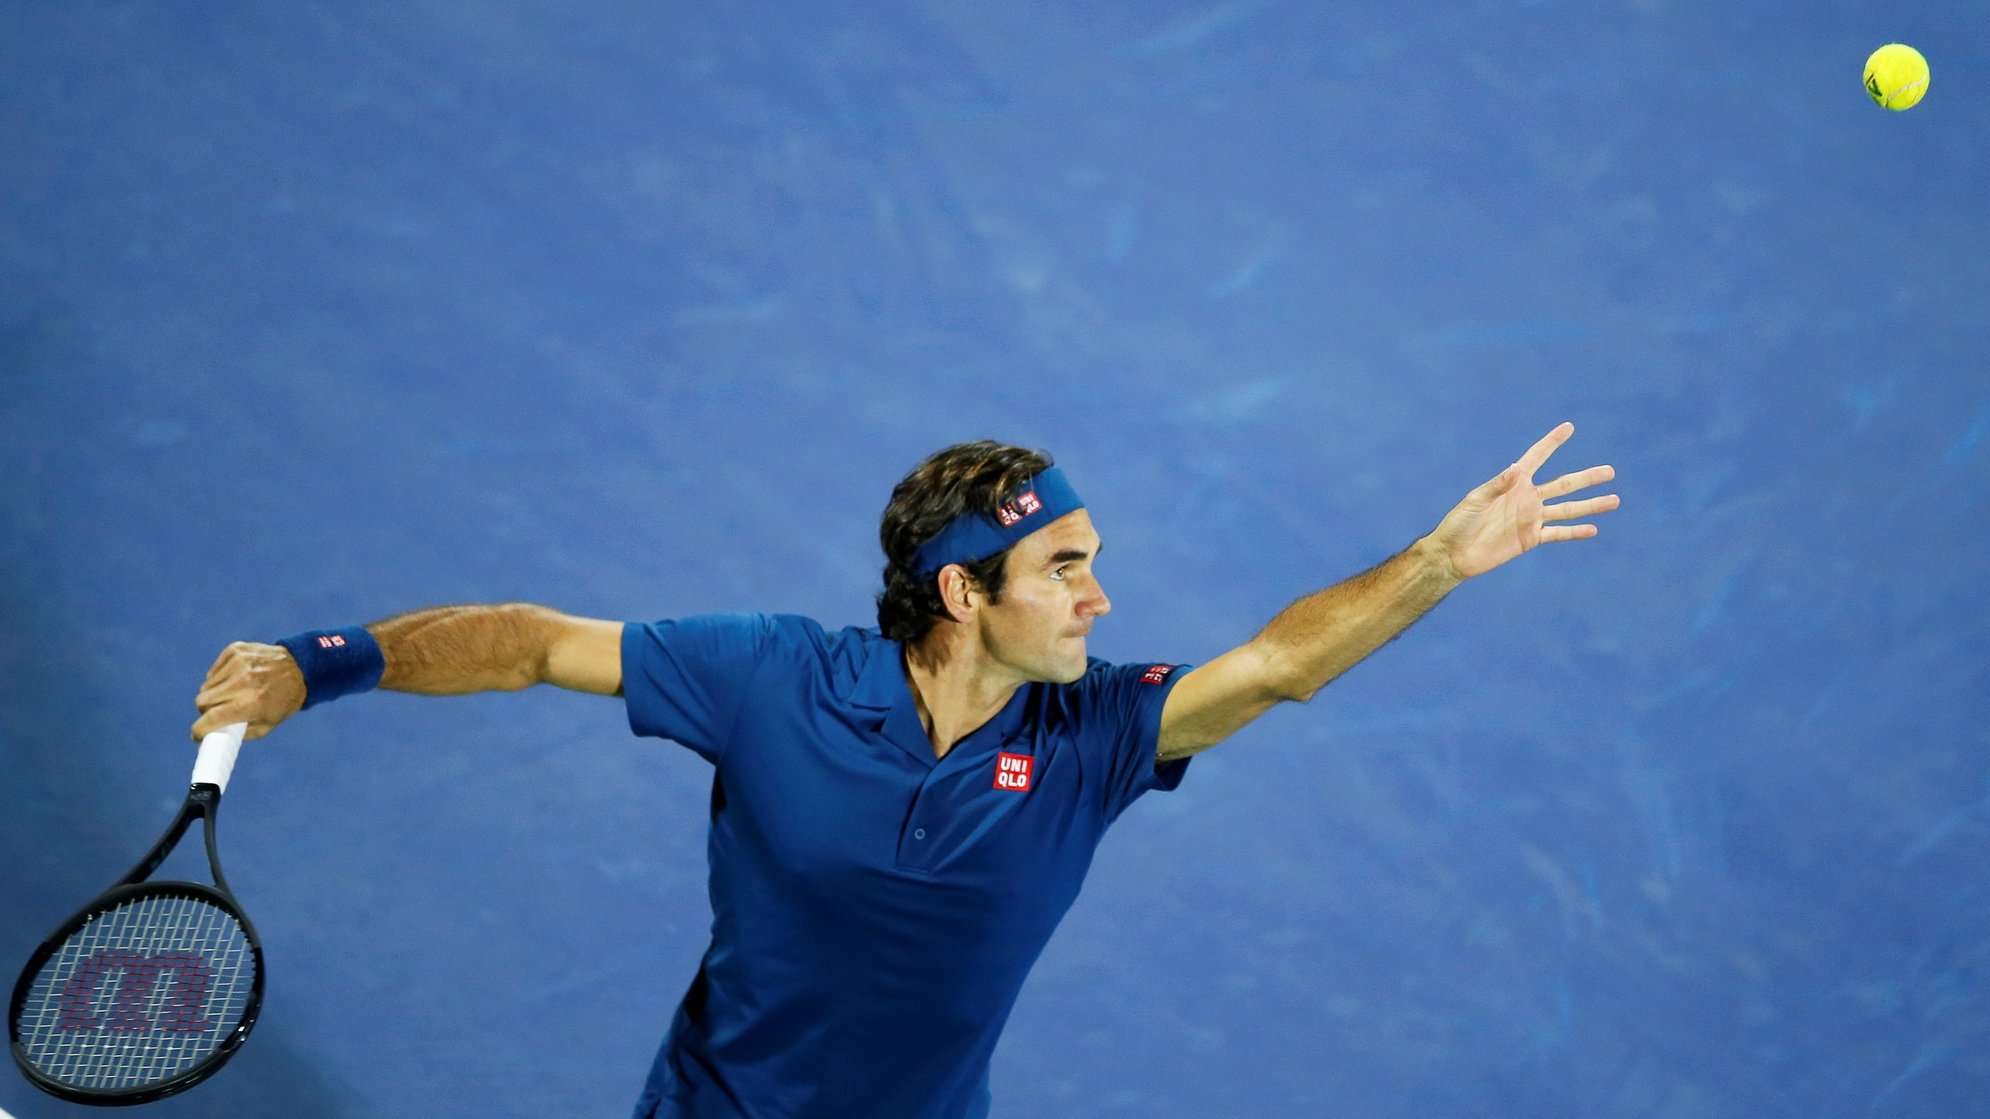 epa08429186 Roger Federer of Switzerland in action during a match at the Dubai Duty Free Tennis ATP Championships 2019 in Dubai, United Arab Emirates, 02 March 2019 (re-issued 18 May 2020). As prominent in both sky and sea, the color blue is often associated with open spaces, freedom, depth and wisdom. In psychology blue is viewed as a non-threatening color and it is believed to have positive and calming effects on body and mind. Often linked with intellect, confidence and reliability, it is known in corporate America as a power color.  EPA/ALI HAIDER ATTENTION: This Image is part of a PHOTO SET *** Local Caption *** 55024934